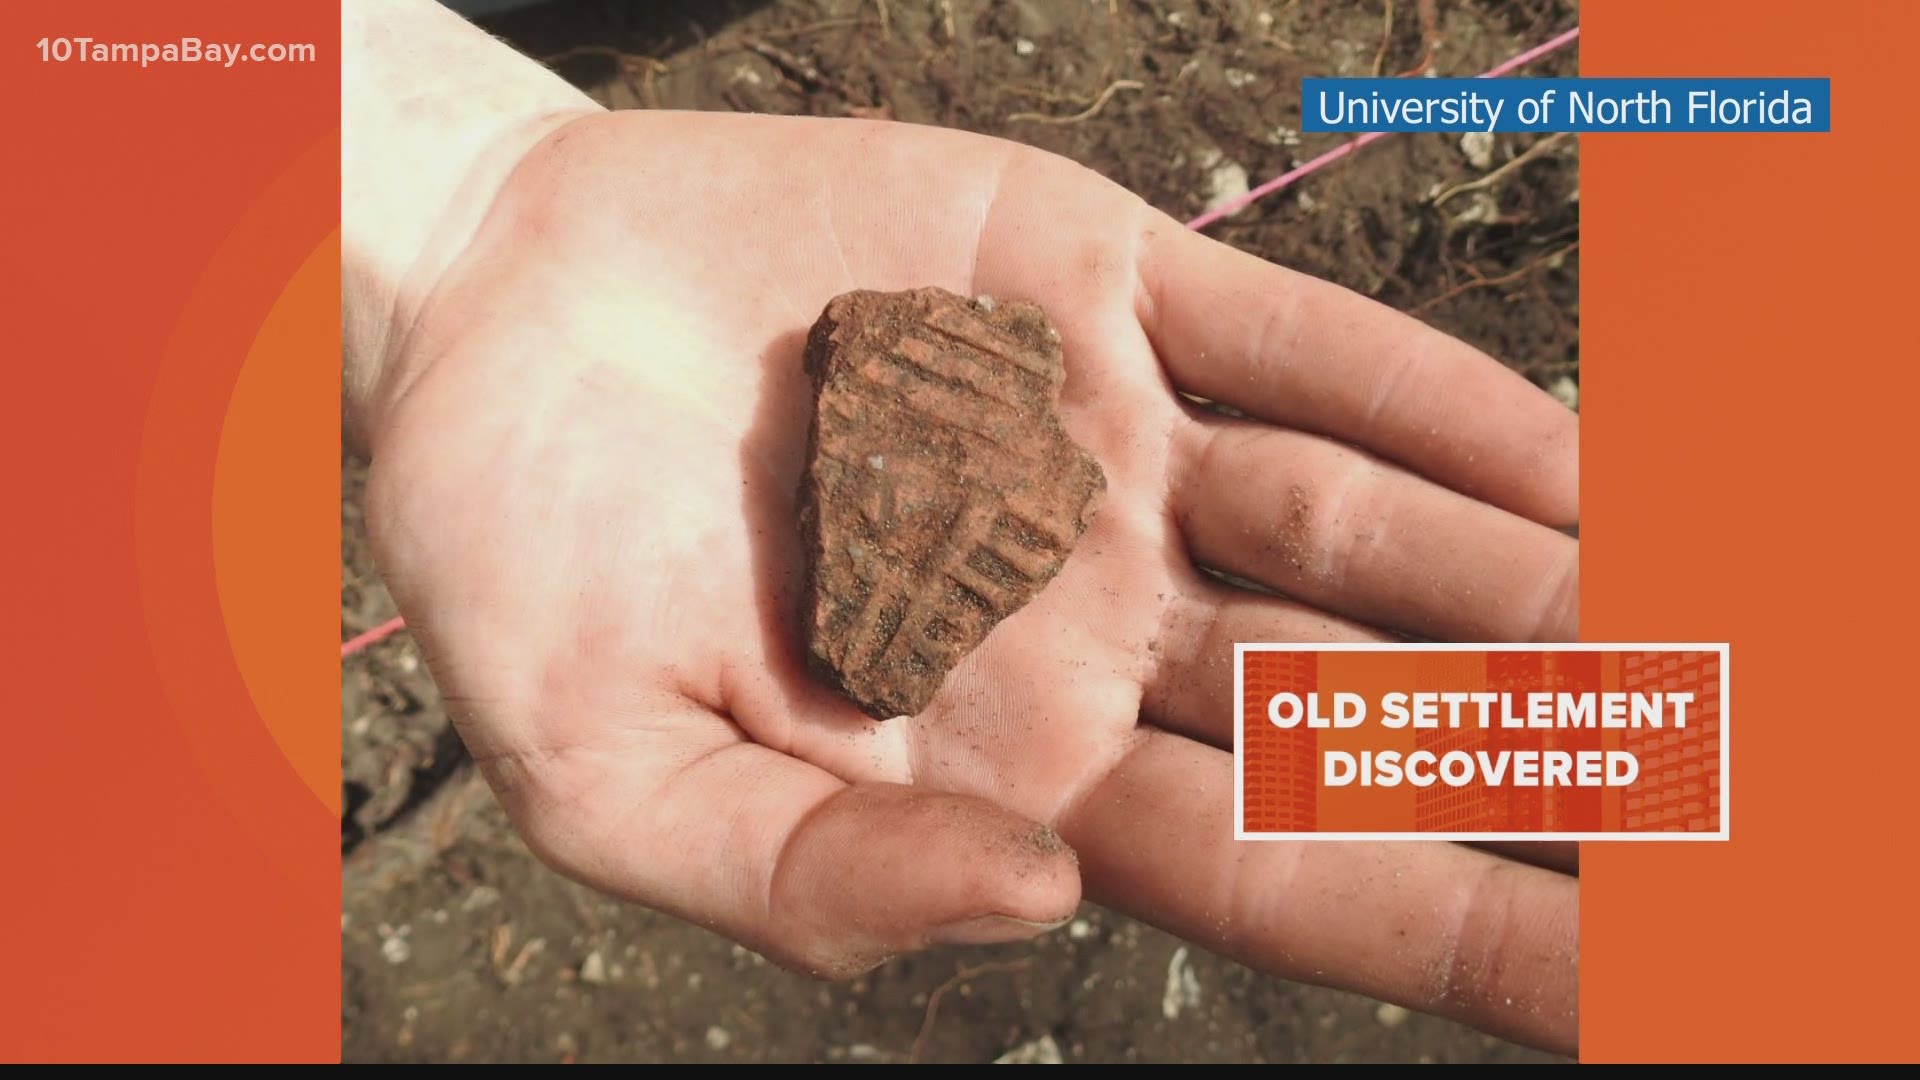 Researches say their findings have led them to believe they've uncovered artifacts belonging to the community of Saraby.